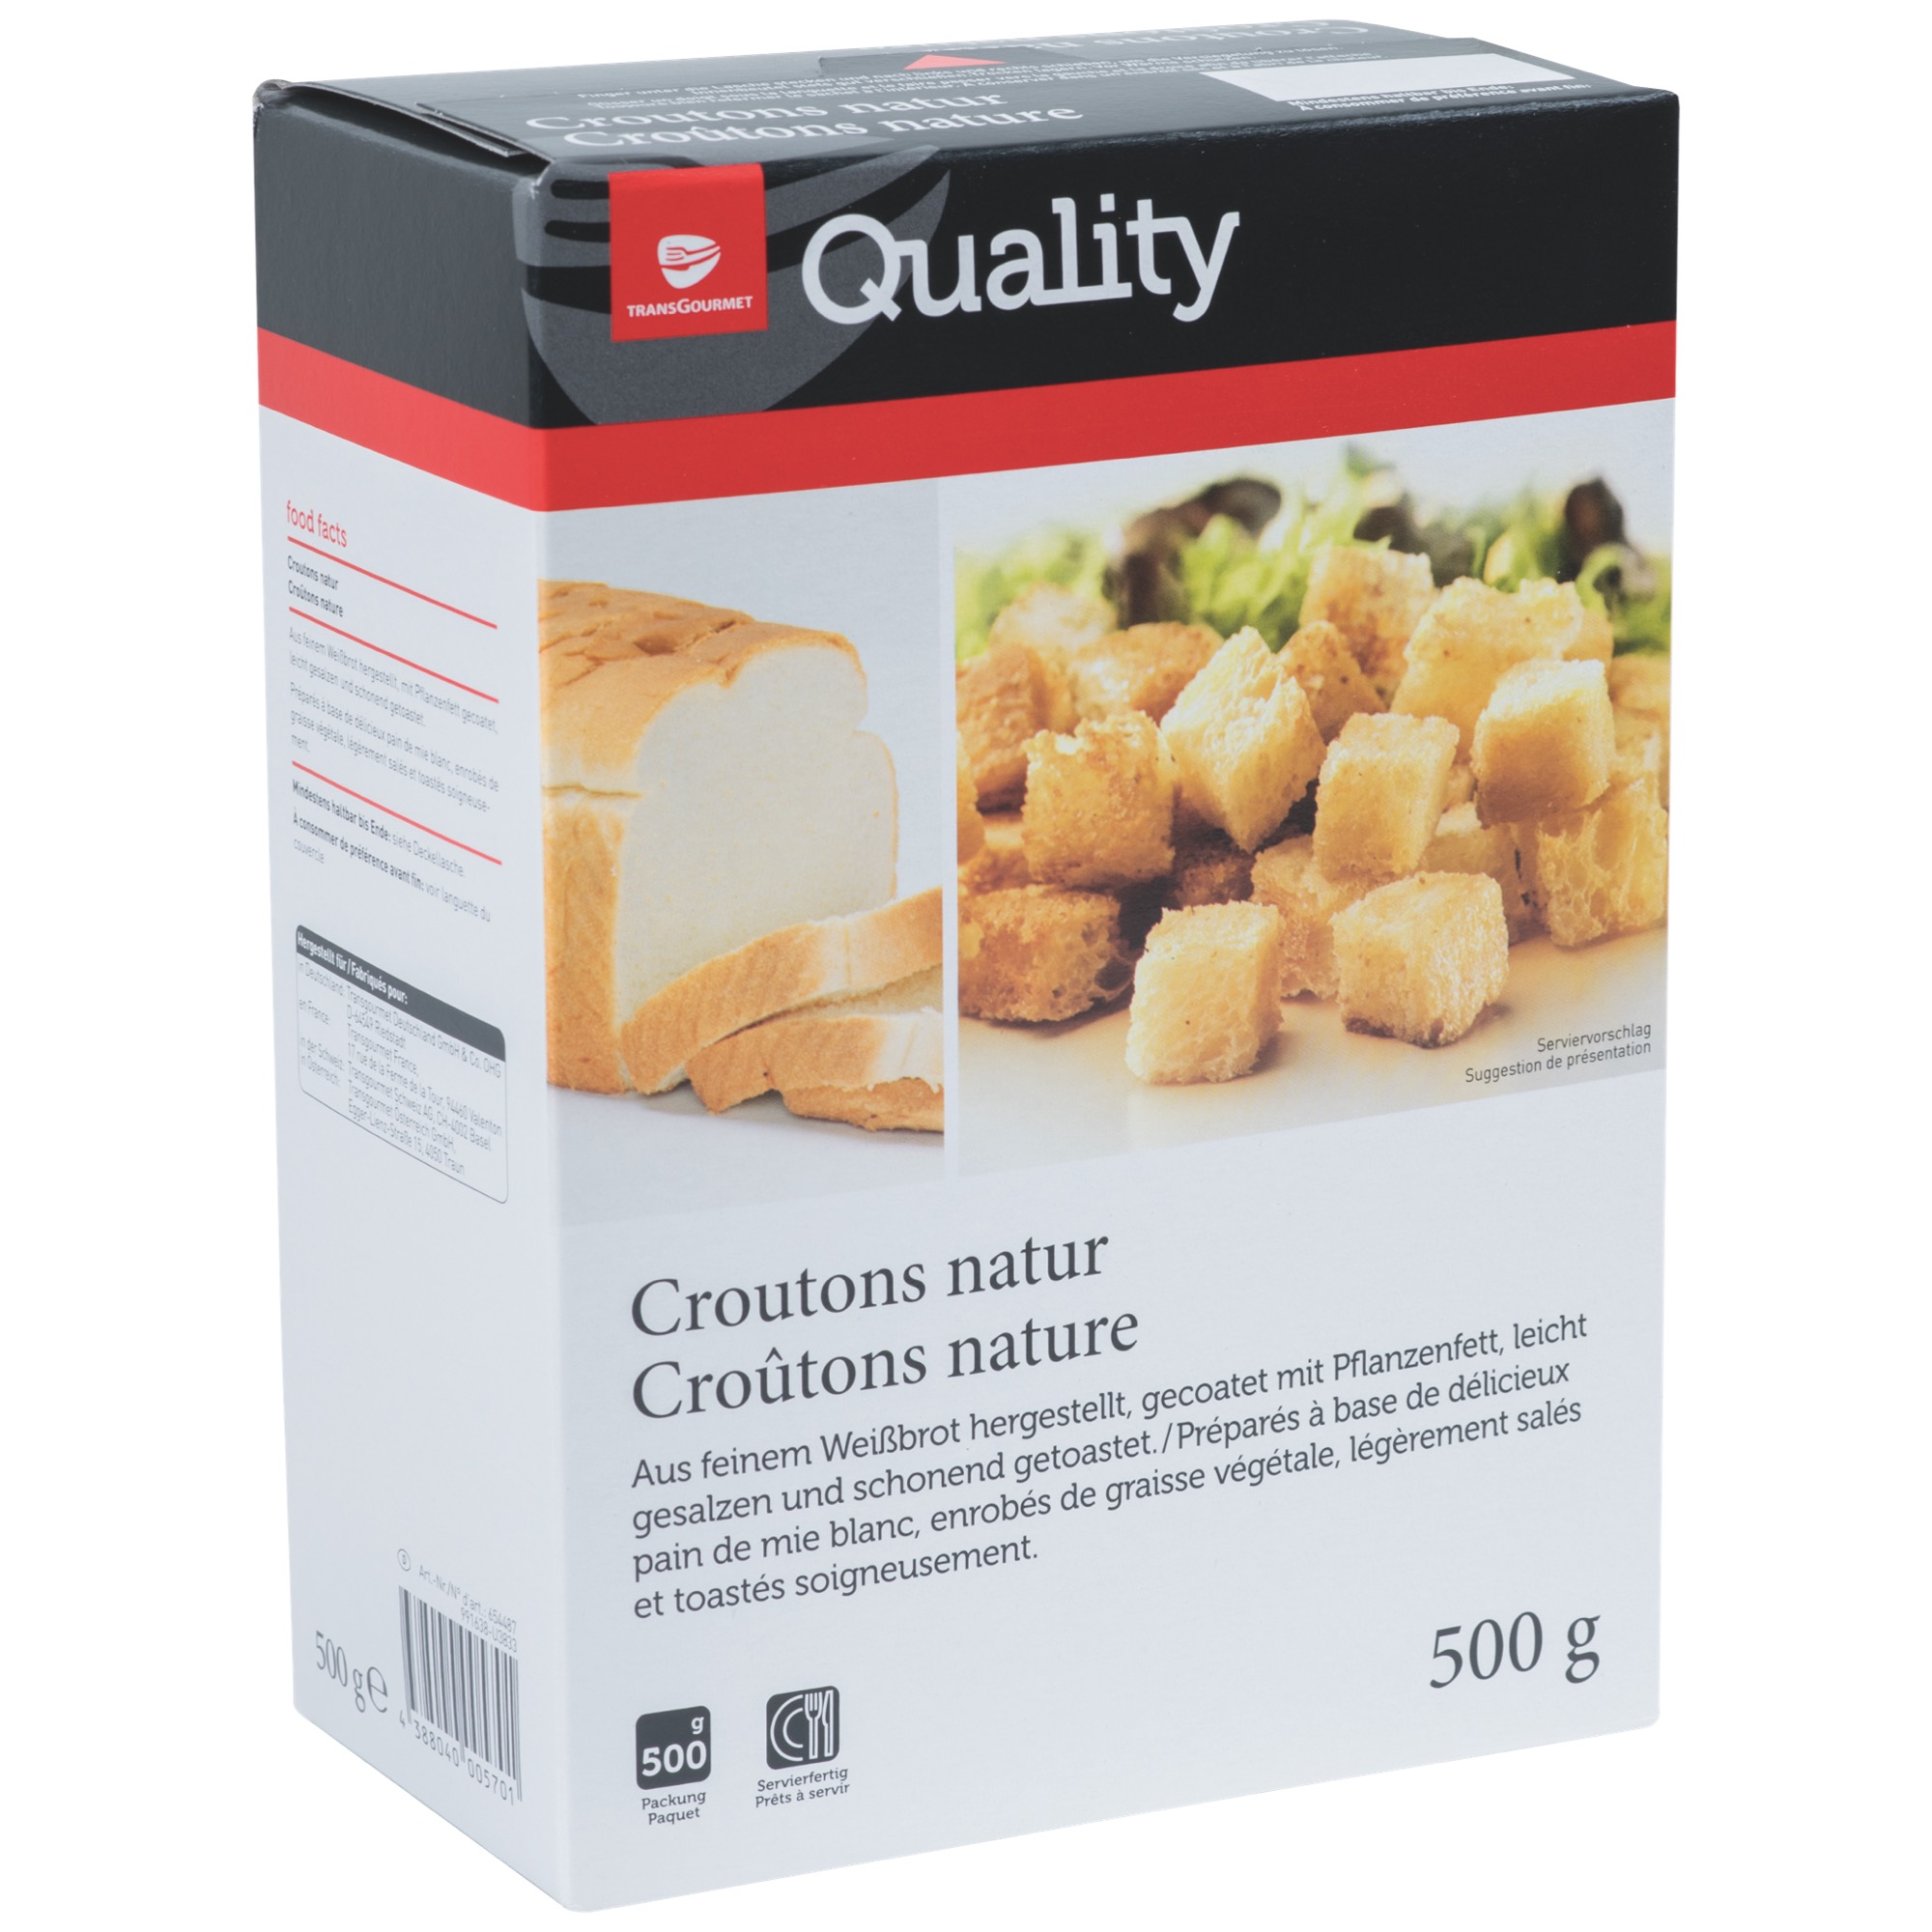 Quality Croutons 500g, Natur